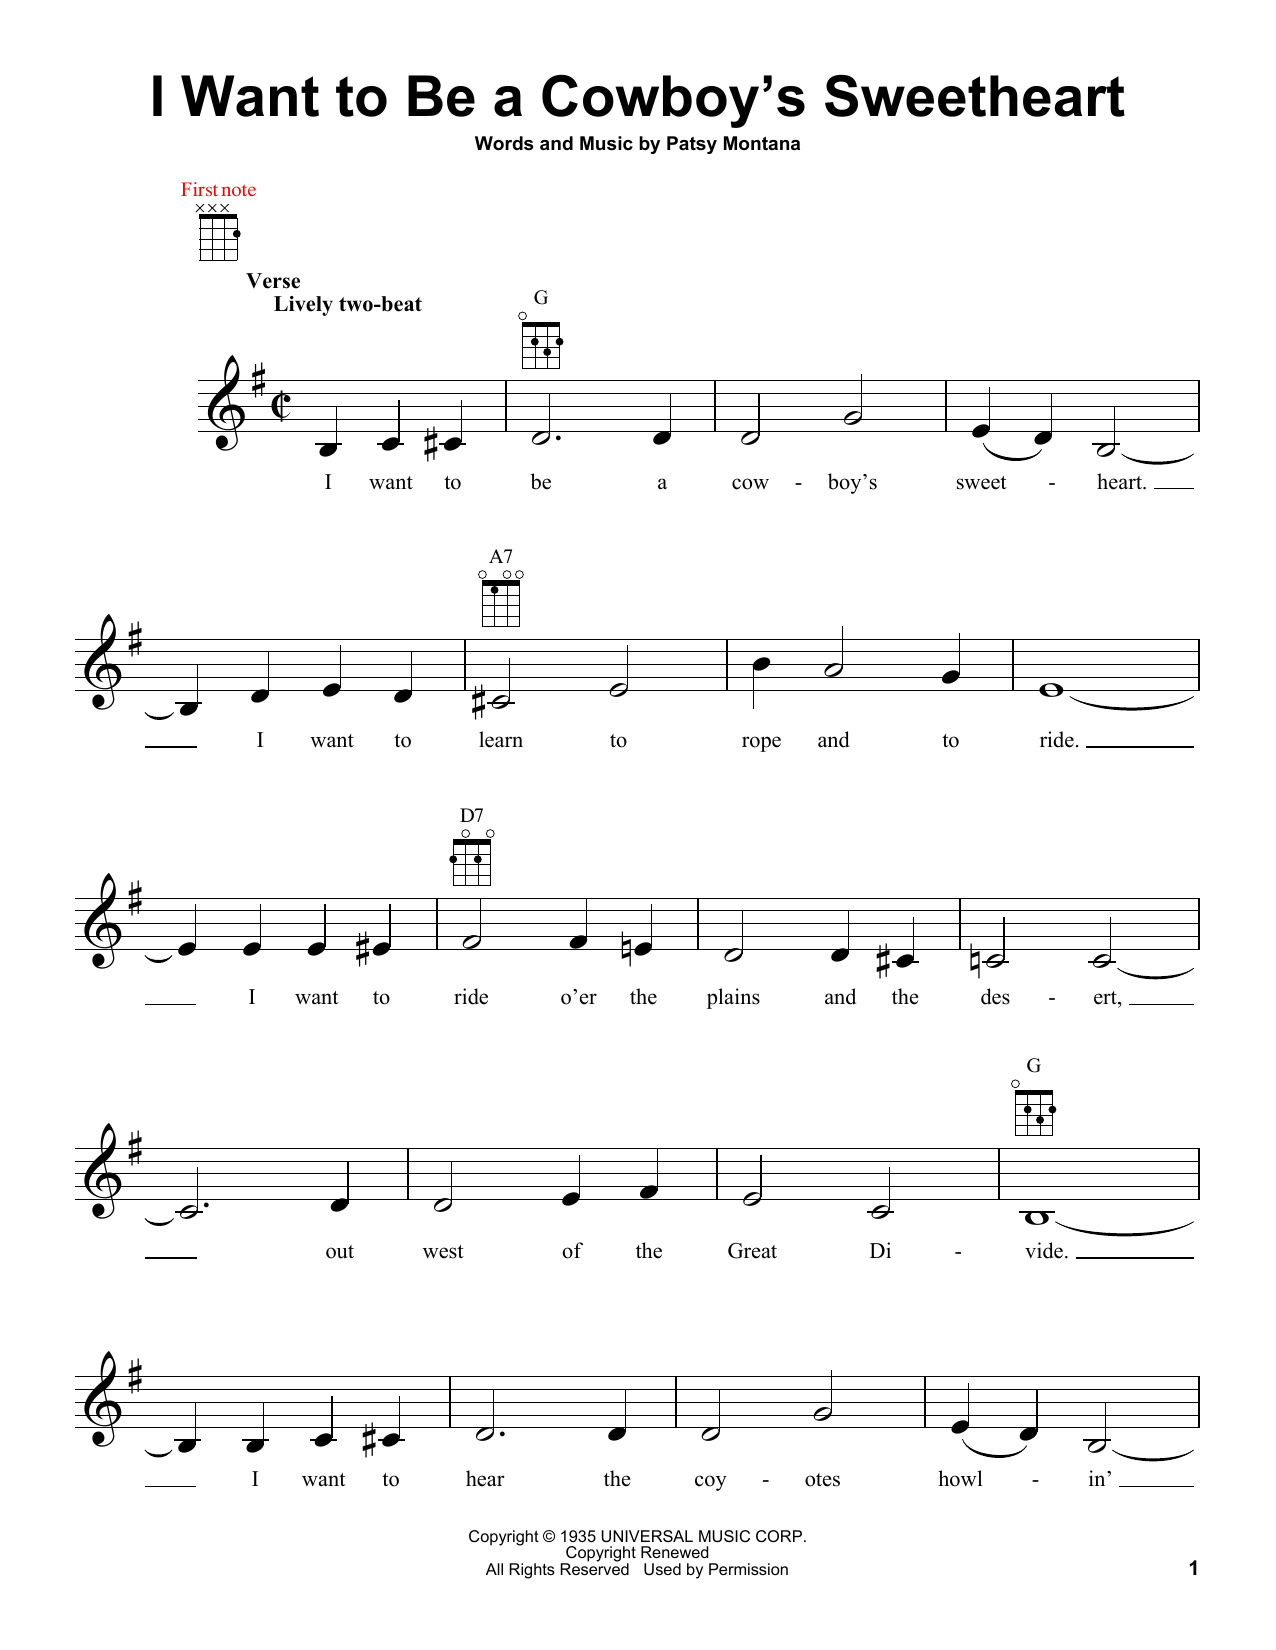 Download Patsy Montana I Want To Be A Cowboy's Sweetheart Sheet Music